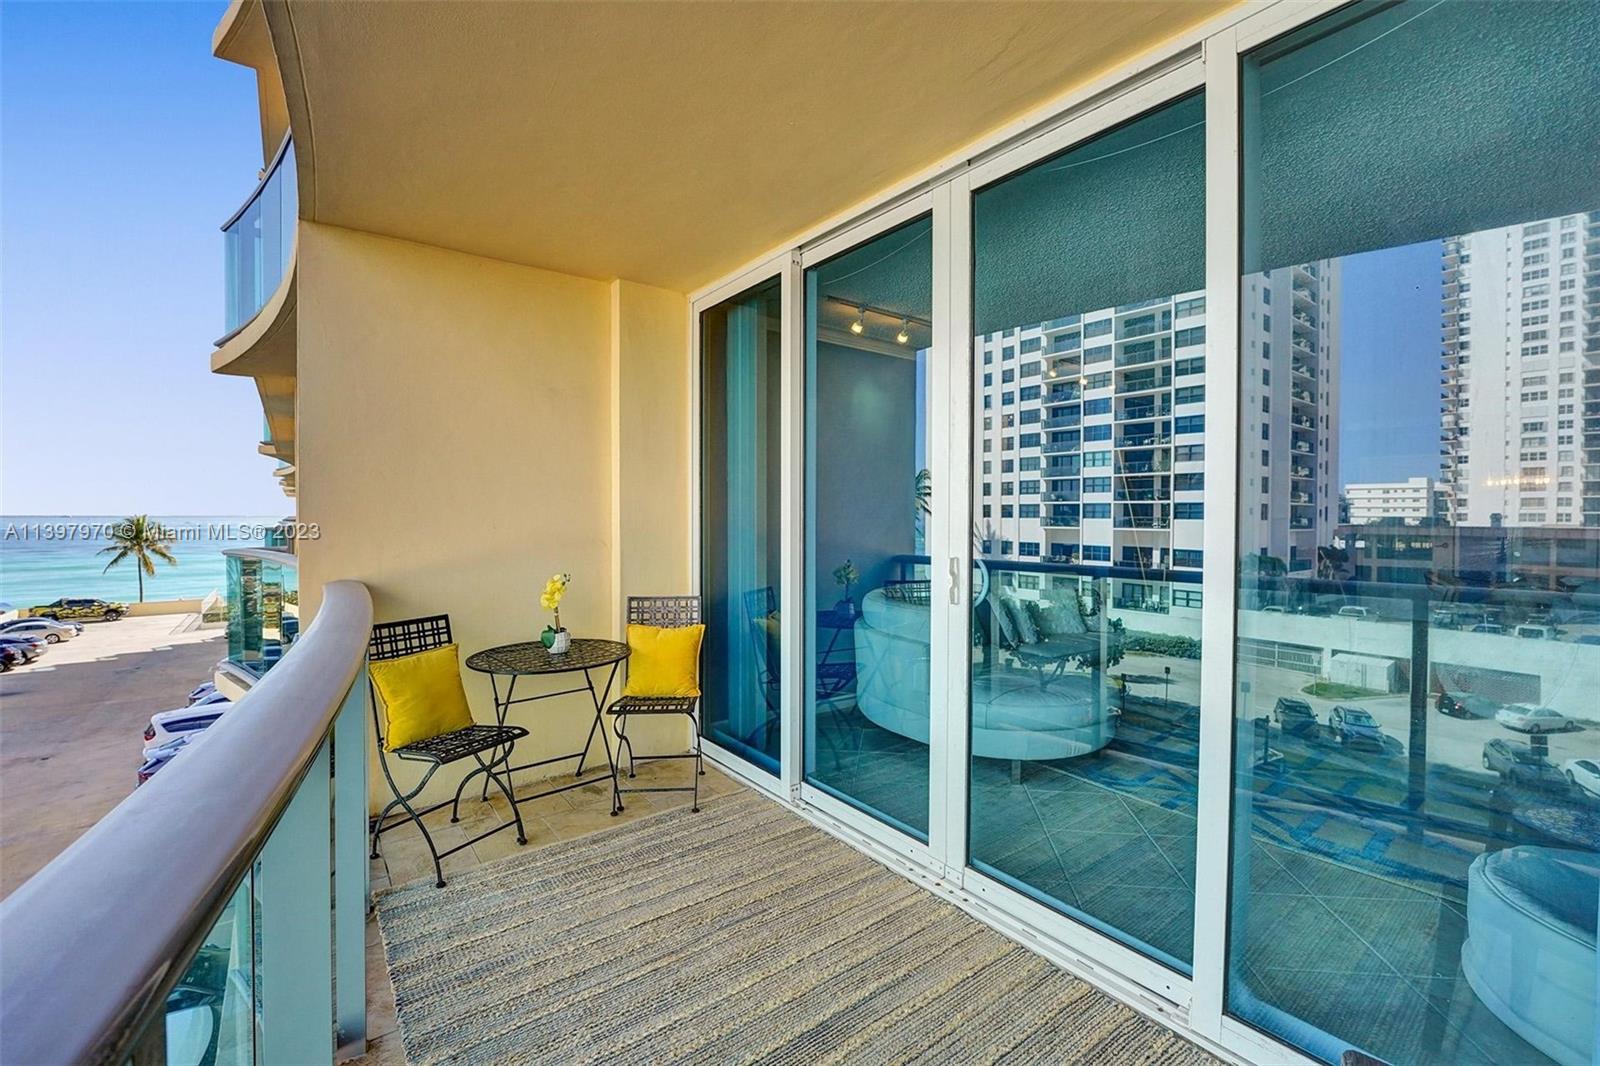 Photo 1 of Wave Condo Apt 401 (available Nov-25) in Hollywood - MLS A11397970